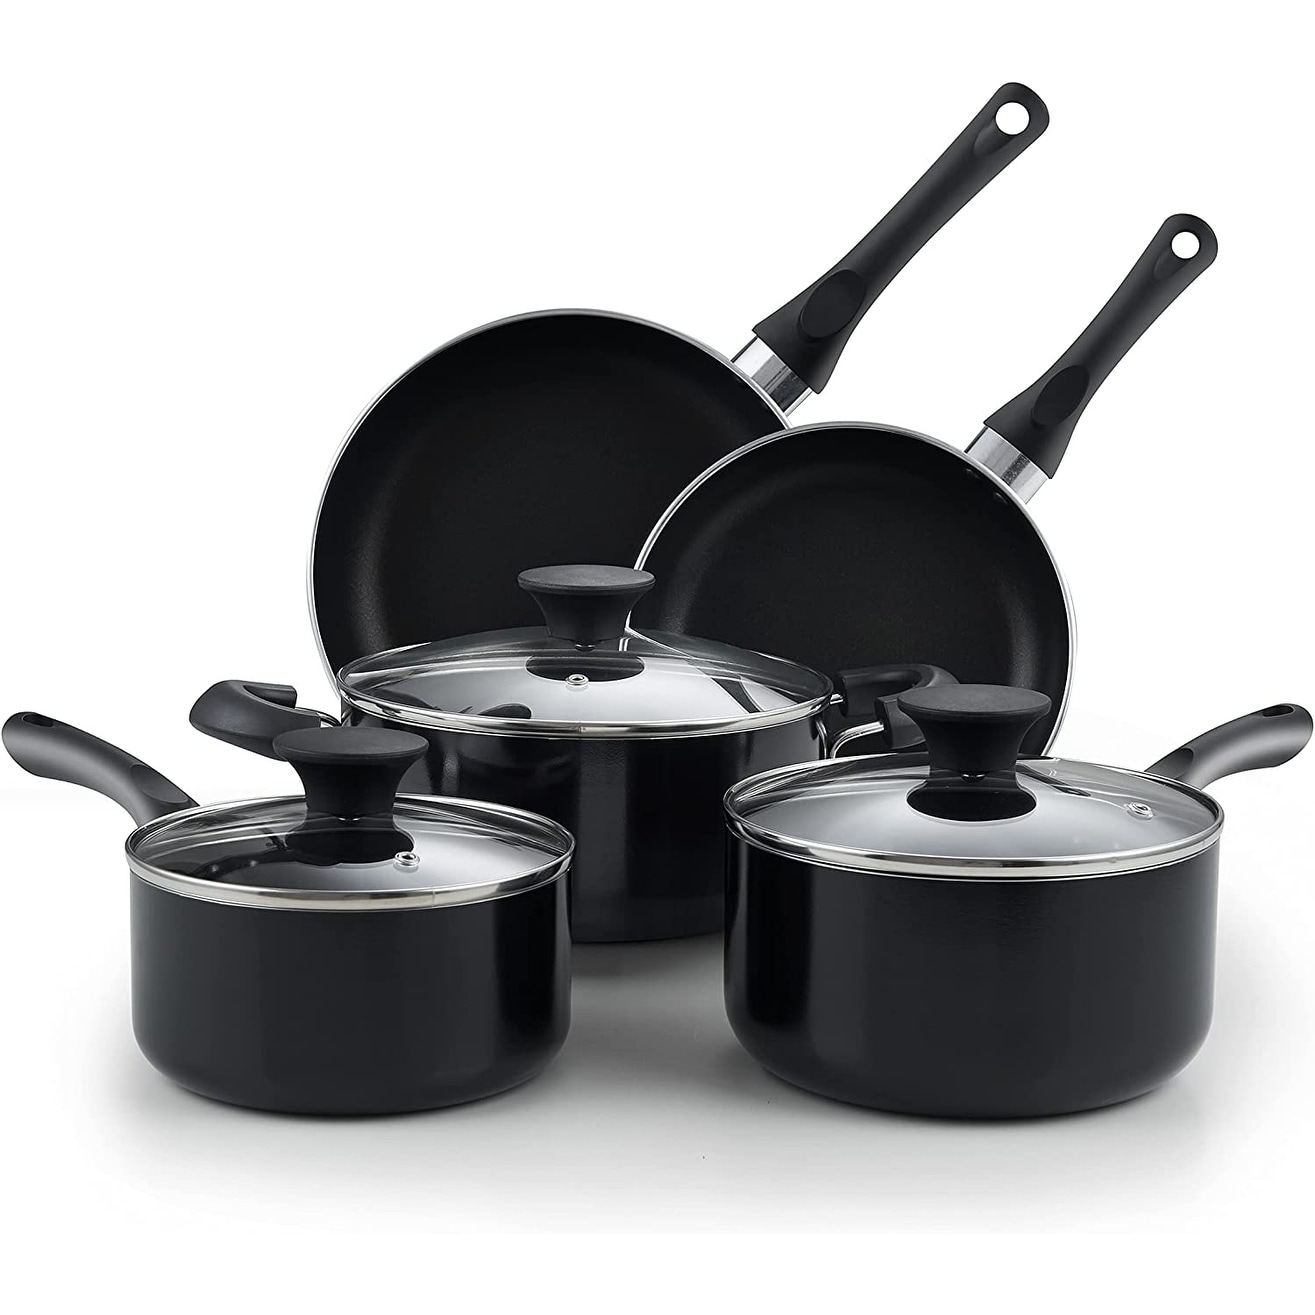 https://ak1.ostkcdn.com/images/products/is/images/direct/b0204976d0e9ef8324e17afb4e9f63b314aa44f1/15-Piece-Nonstick-Stay-Cool-Handle-Cookware-Set%2C-Black.jpg